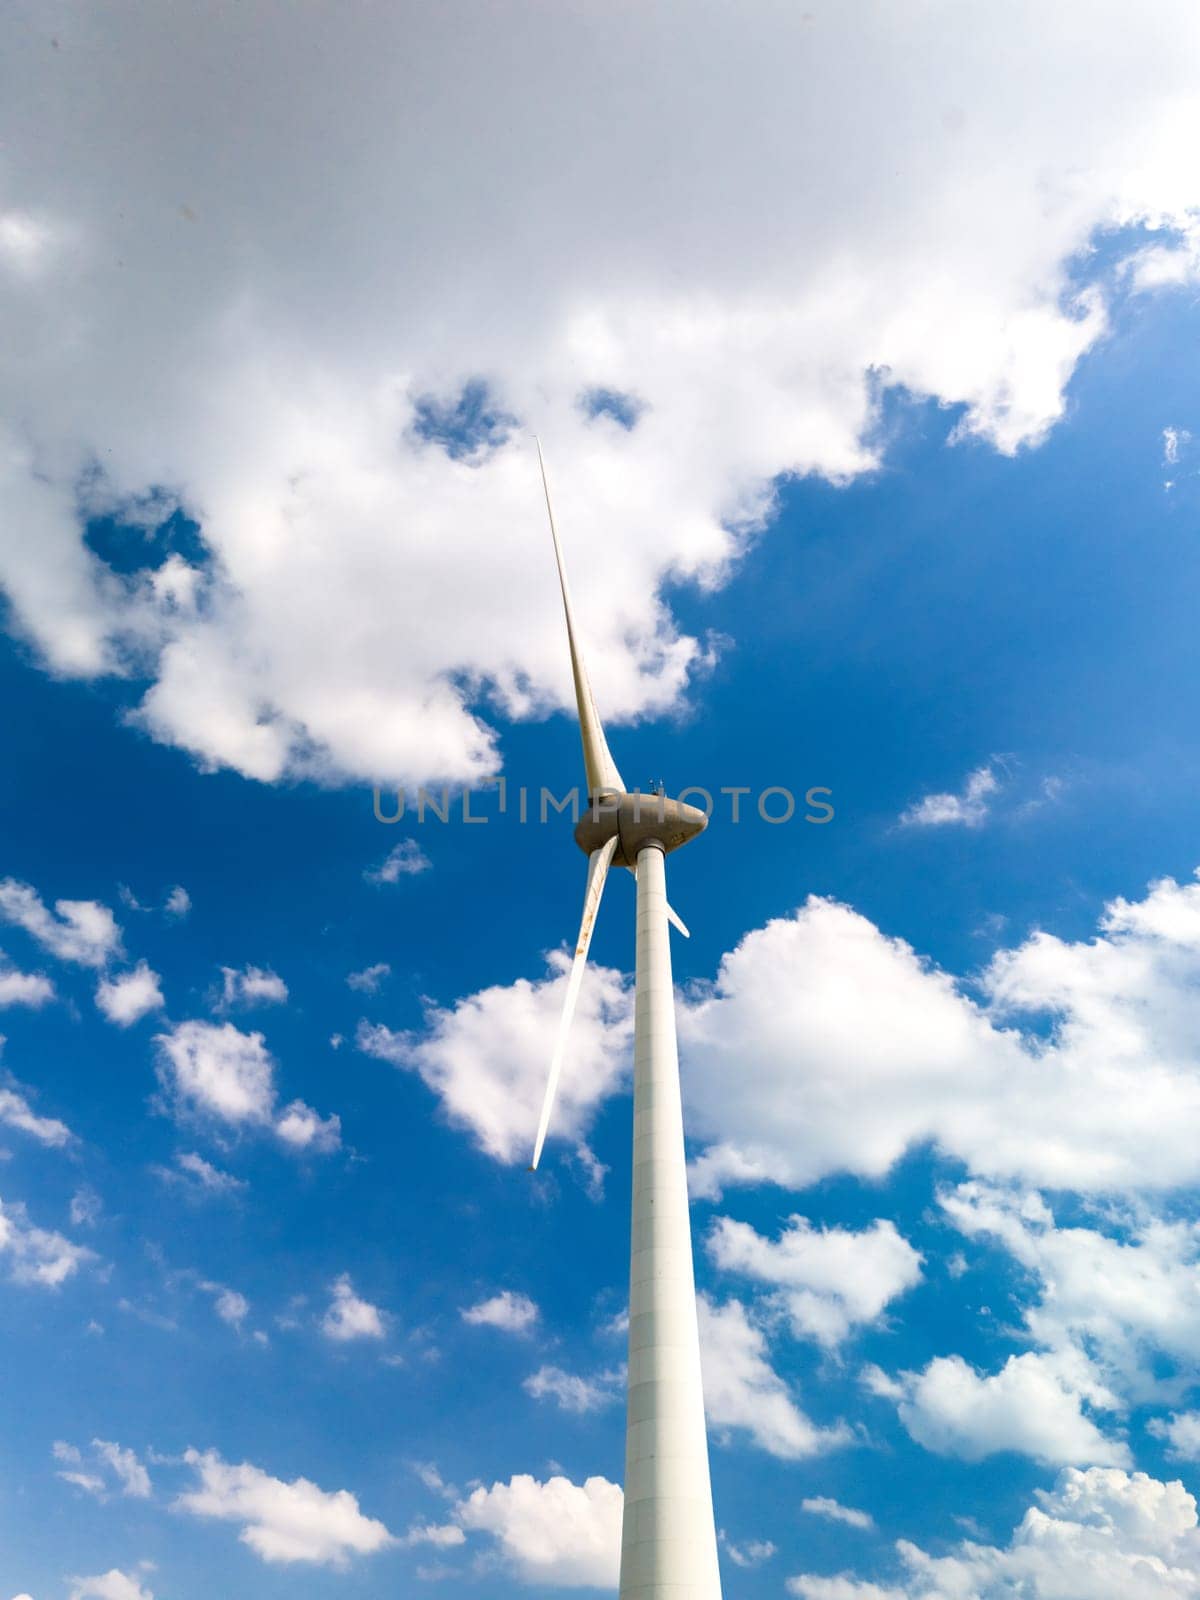 A tall wind turbine gracefully spins in the center of a clear, blue sky, harnessing the power of the wind in Flevoland, Netherlands.